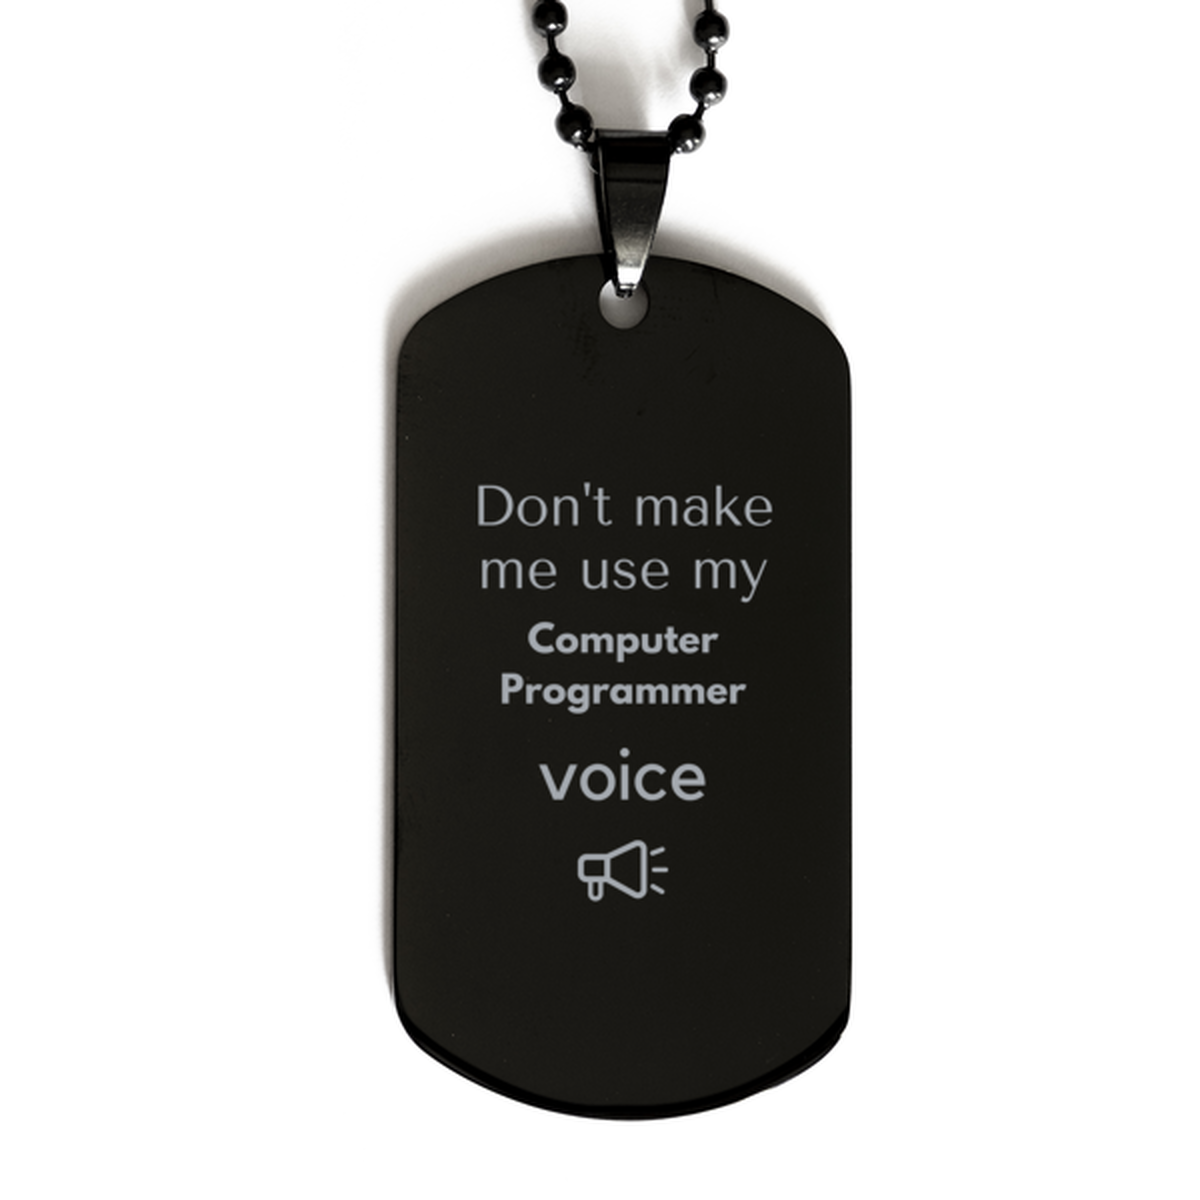 Don't make me use my Computer Programmer voice, Sarcasm Computer Programmer Gifts, Christmas Computer Programmer Black Dog Tag Birthday Unique Gifts For Computer Programmer Coworkers, Men, Women, Colleague, Friends